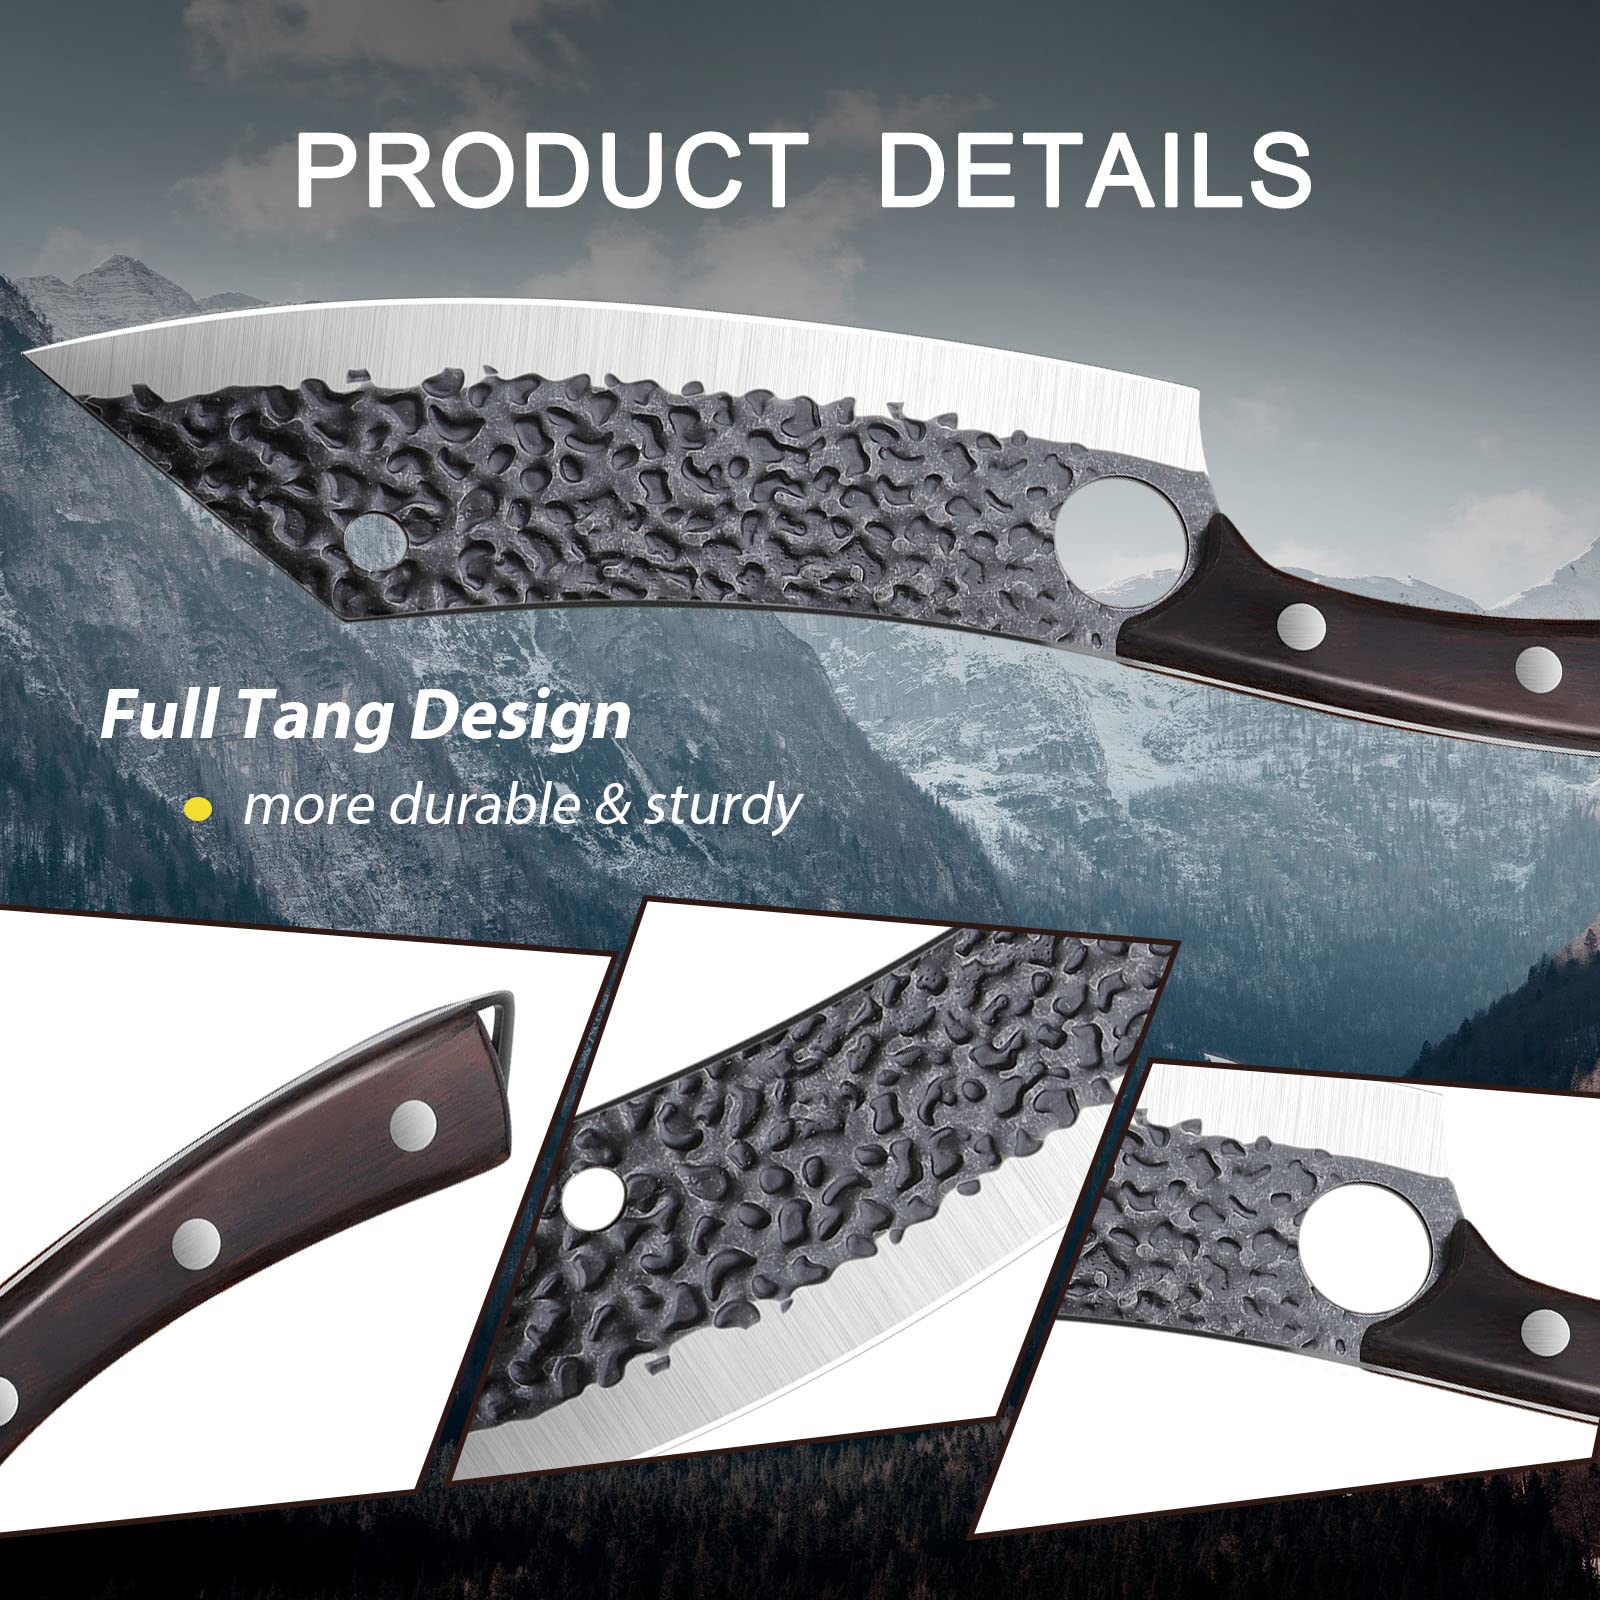 Purple Dragon Butcher Knife Ultra Sharp Chef Knife with 7 Inch Boning Knife Hand Forged Fillet Knife